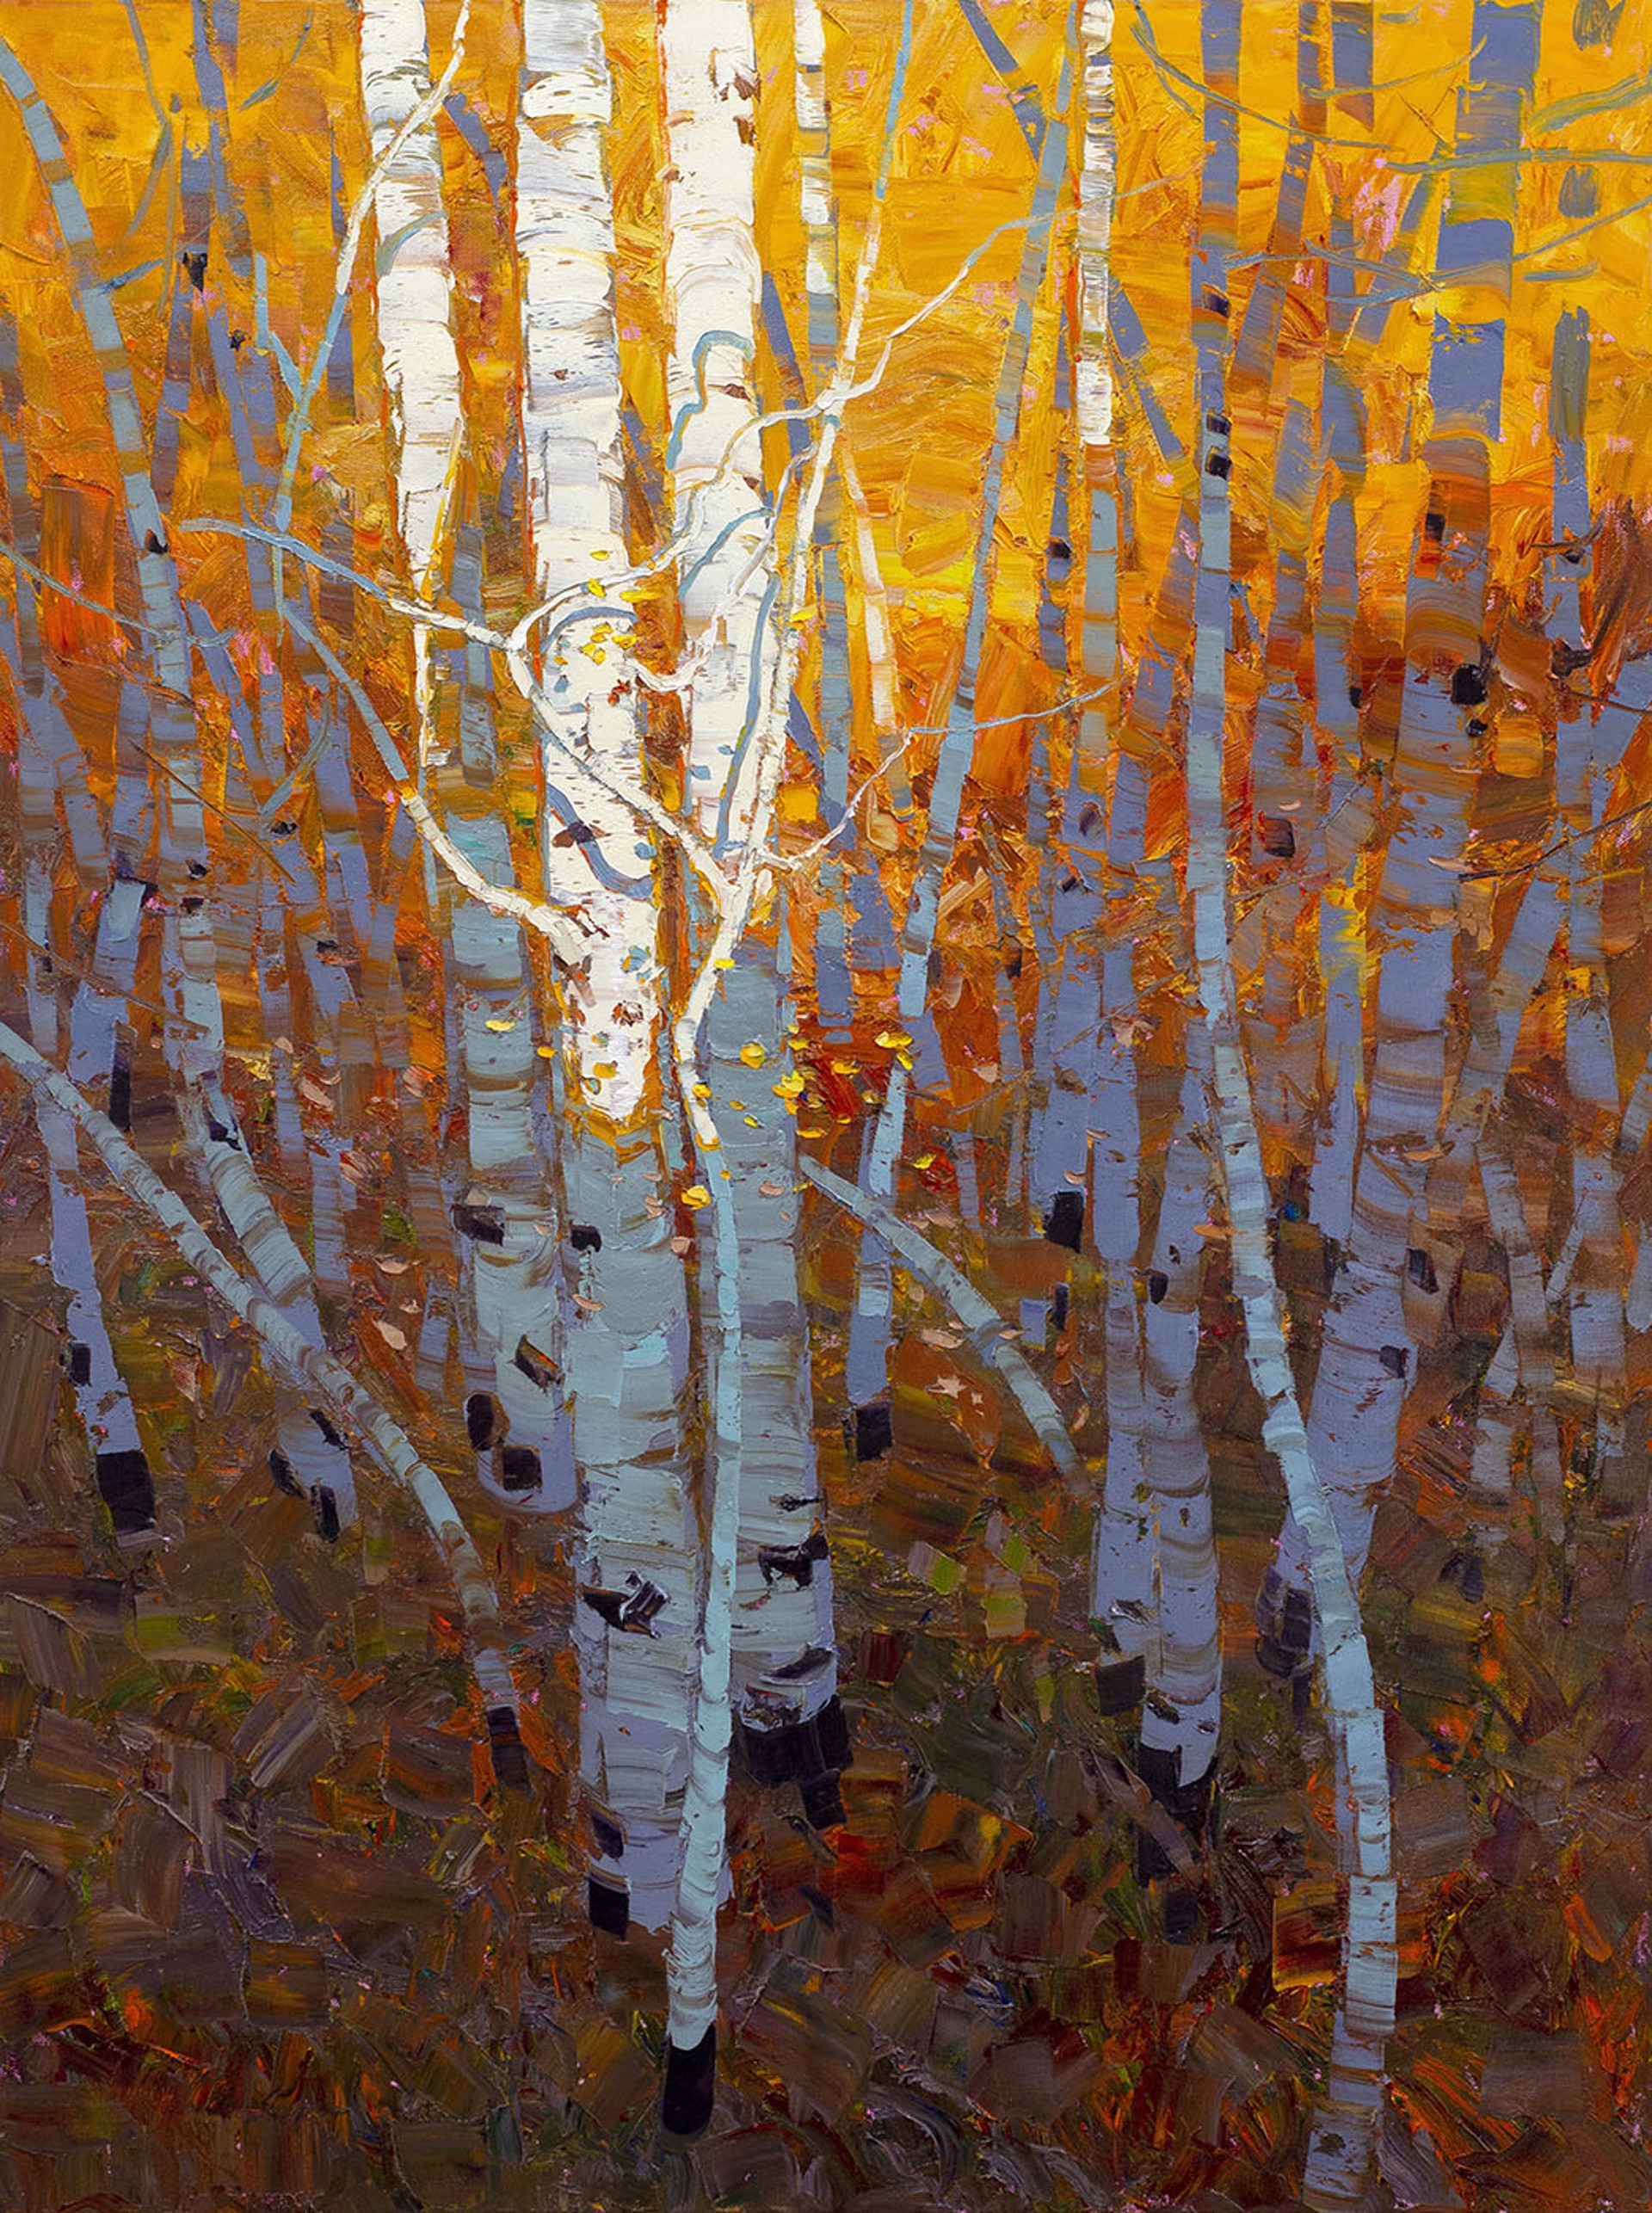 Original Oil Paining By Silas Thompson Featuring Yellow Aspen Trees 